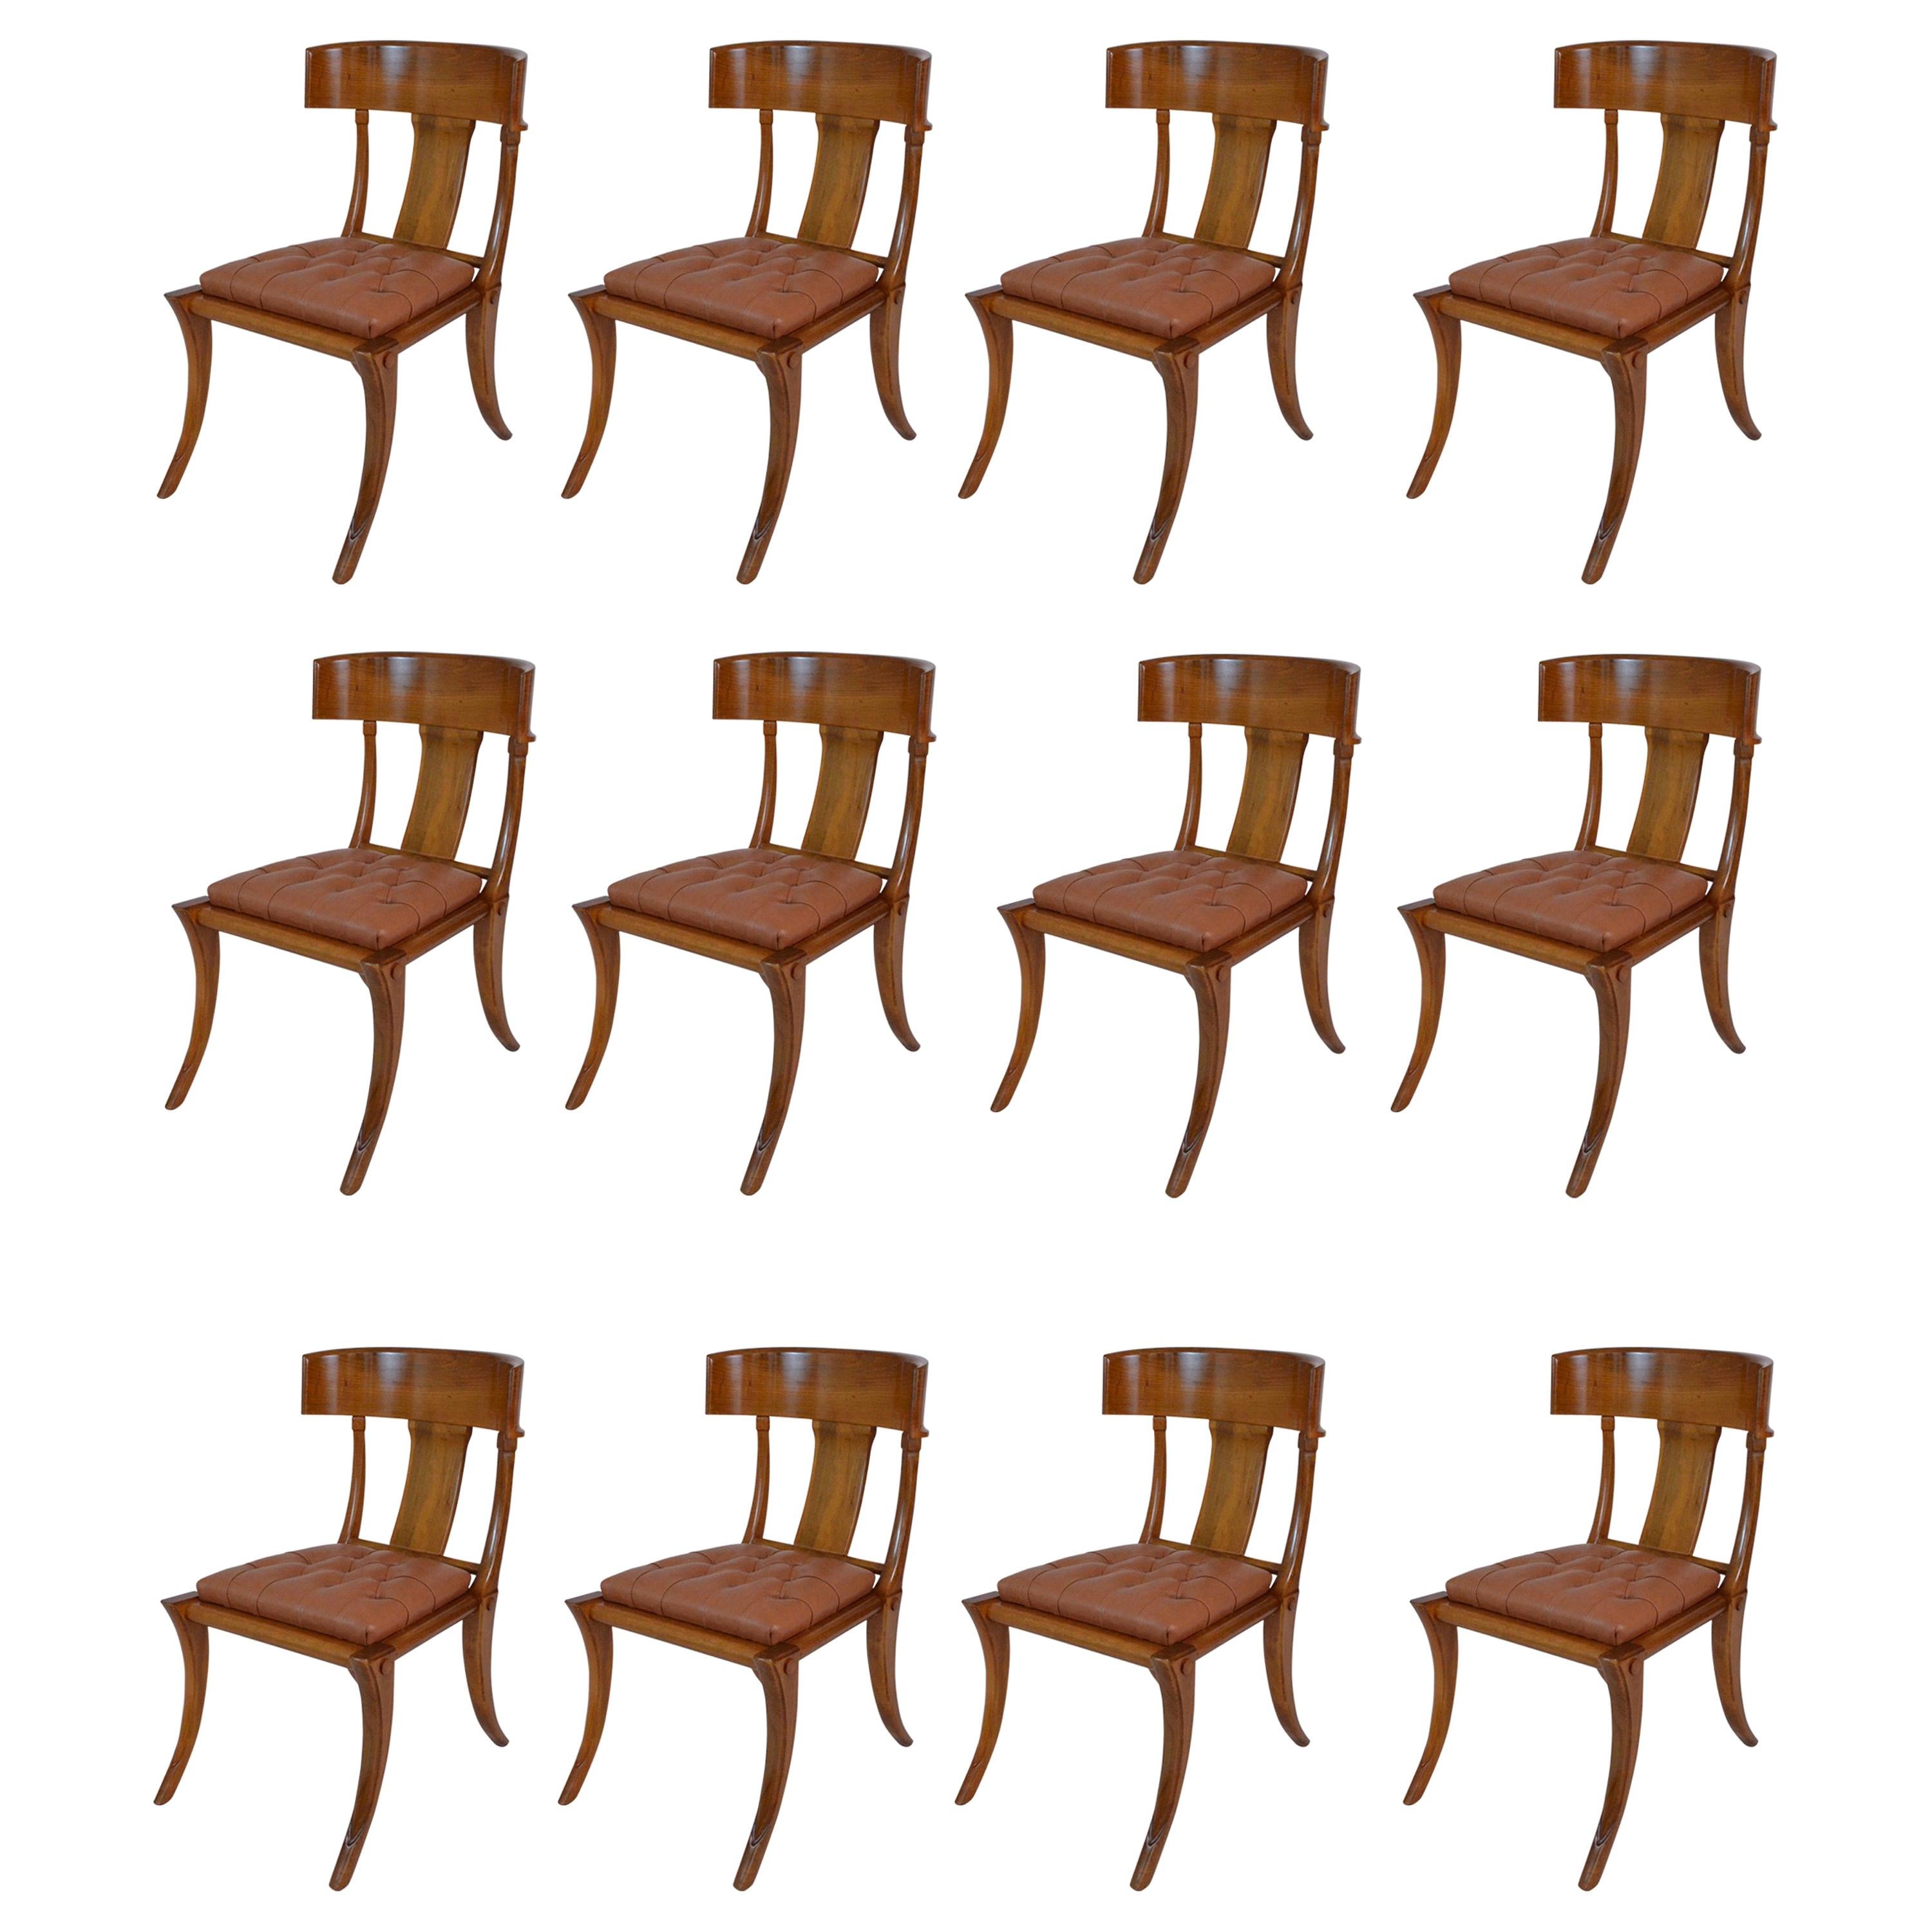 Klismos customizable chairs with saber legs, natural wood shiny finishing and leather seats with buttons. Available in other colors and upholstery.

Walnut wood chairs with deep and large seat and back wraparound feeling backrest. These chairs are